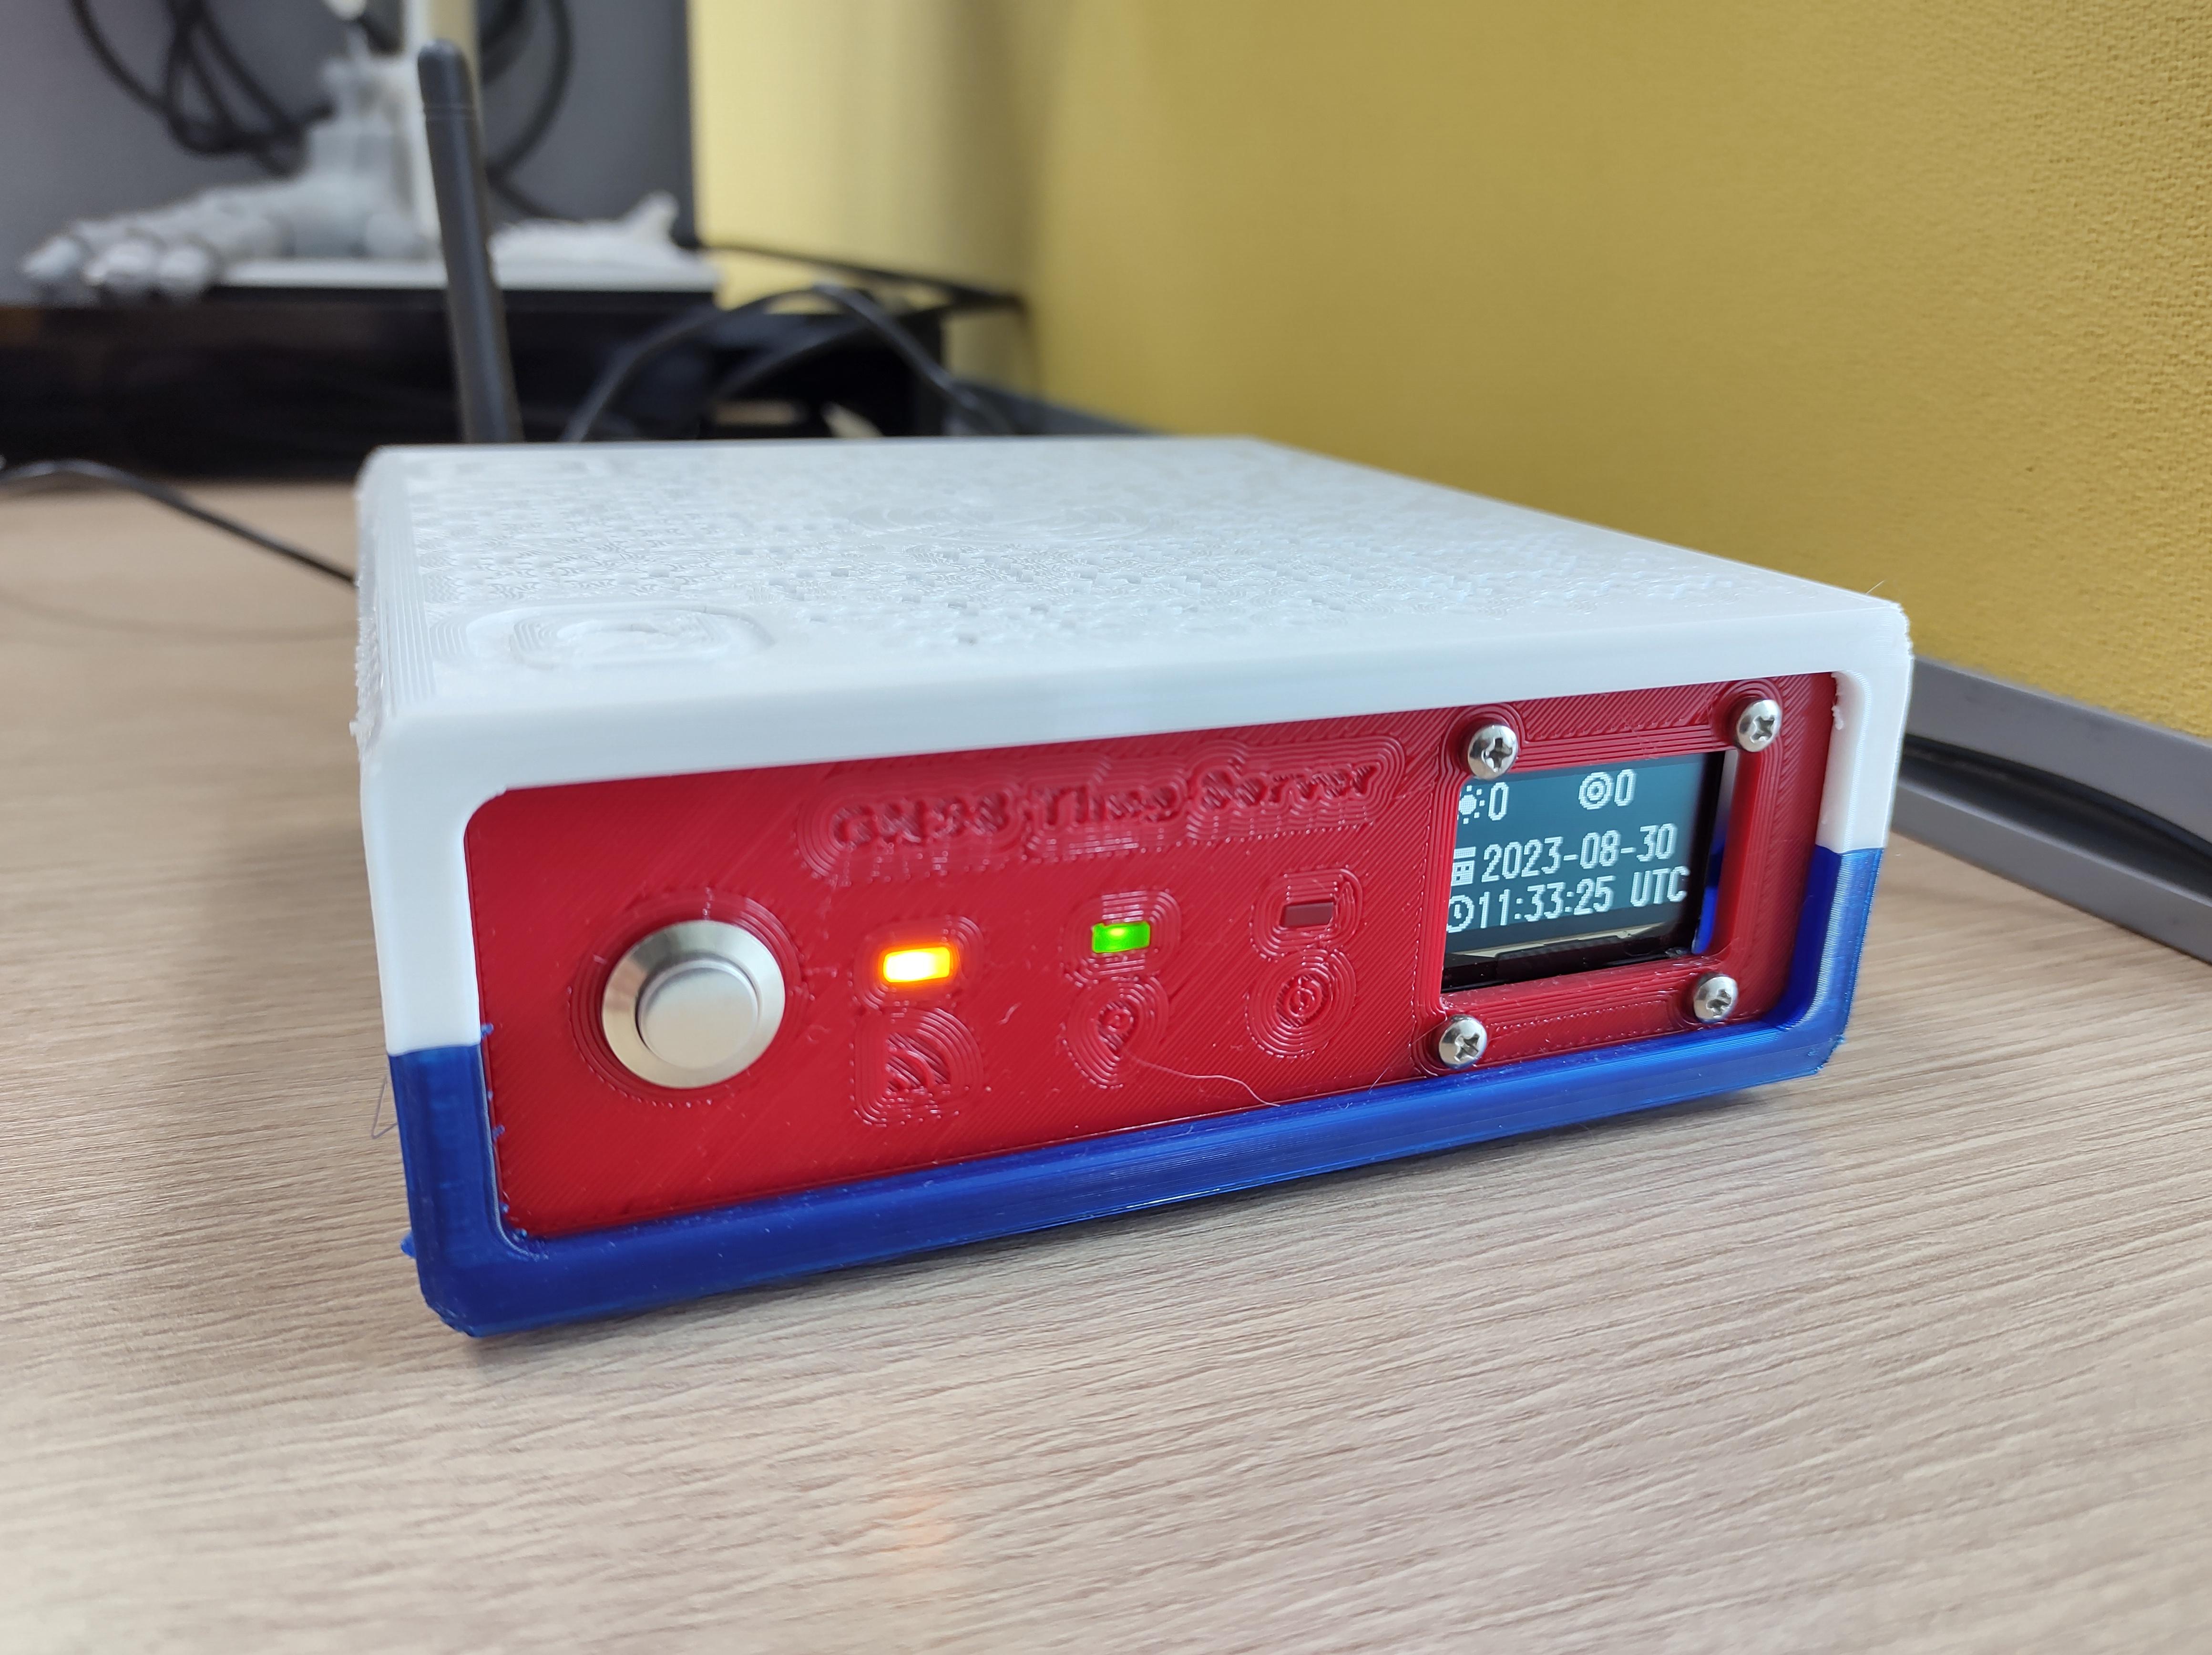 Wi-Fi Enabled Stratum-1 GNSS Time Server Built From Scratch